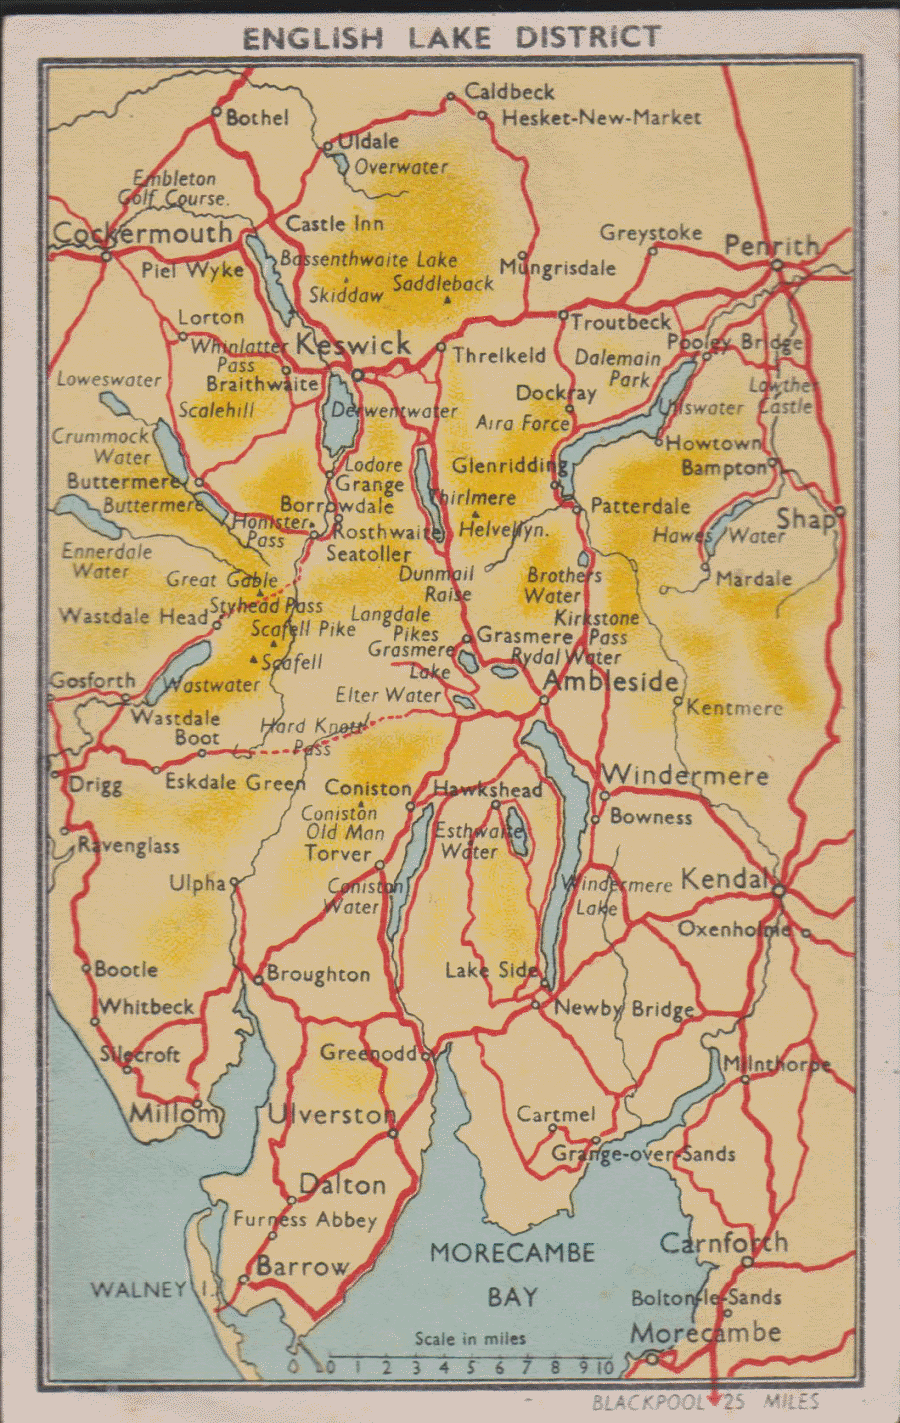 Postcard- Maps - English Lake District used by P M Hope